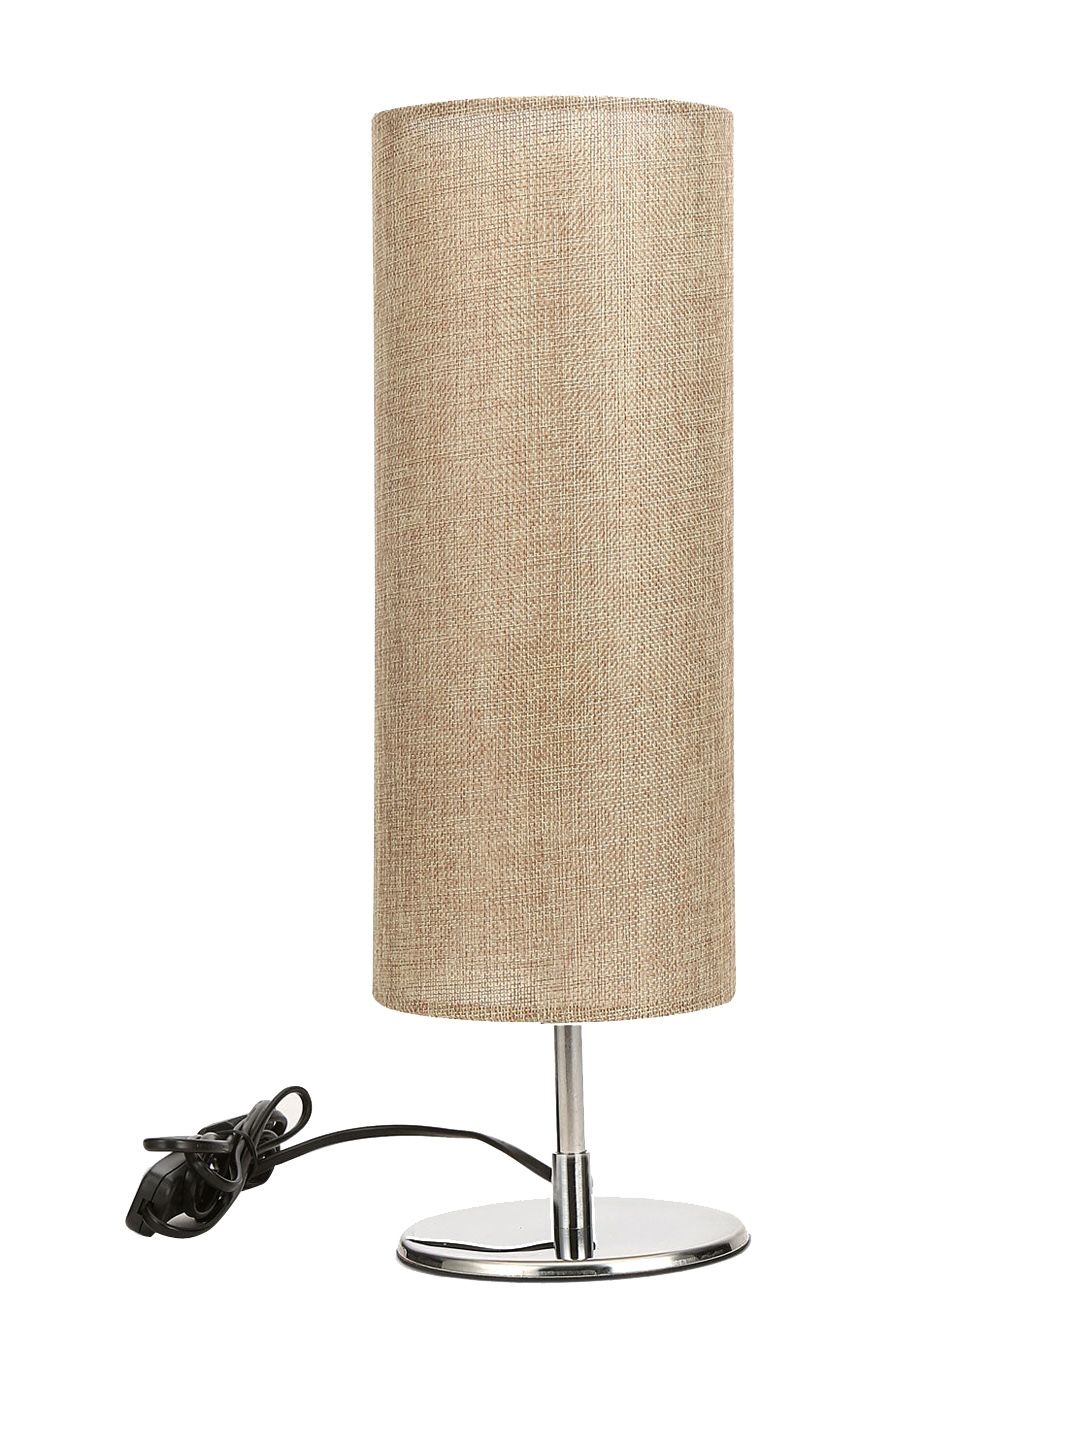 Athome by Nilkamal Cream-Coloured Cylindrical Table Lamp Price in India